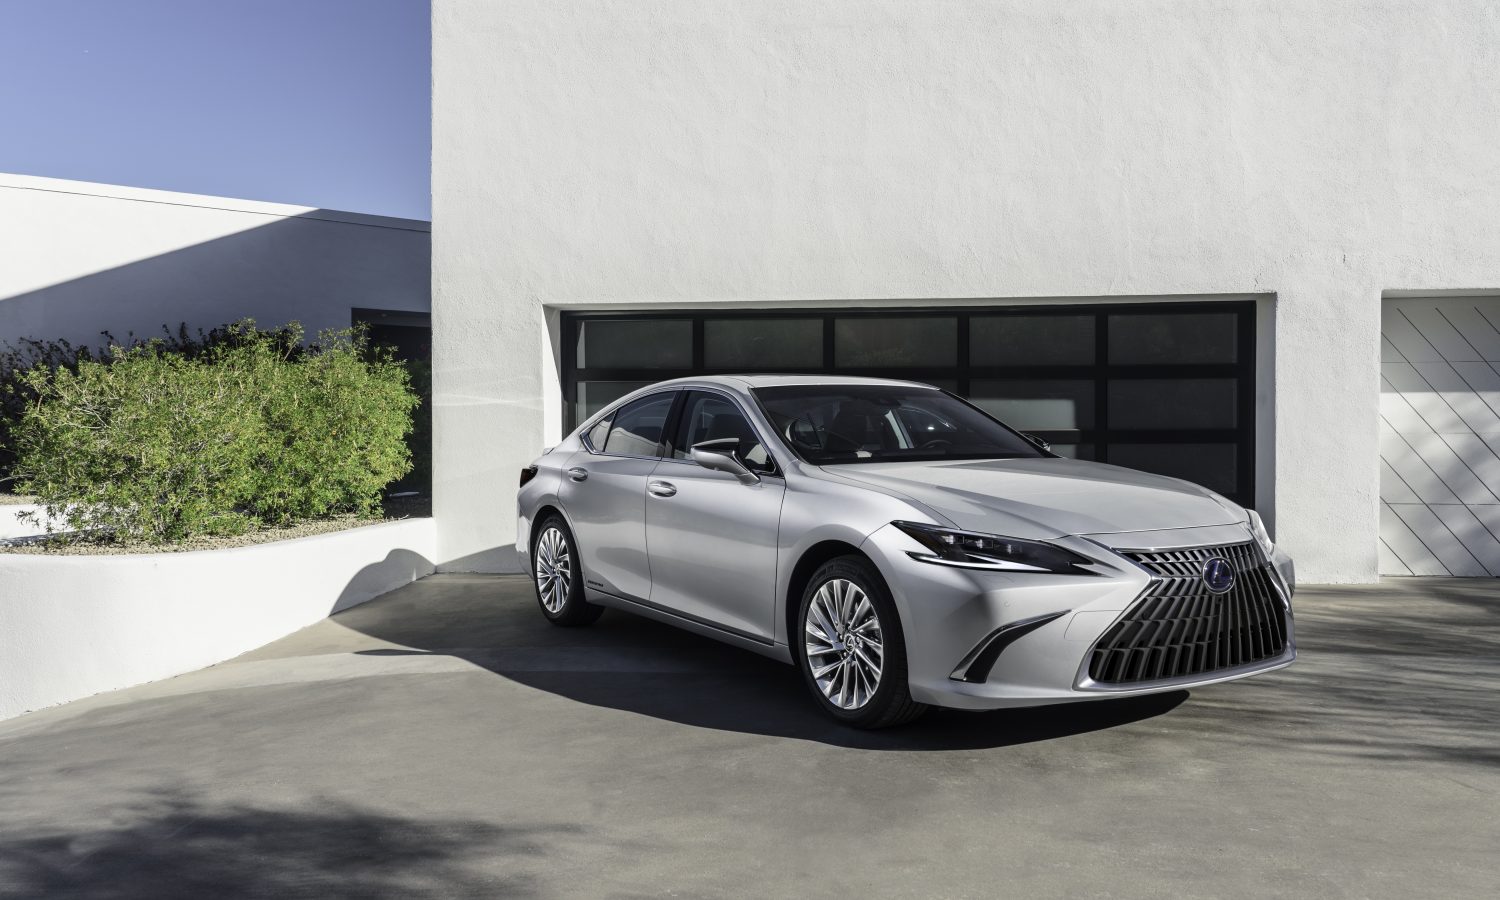 LEXUS ES FAMILY RETURNS FOR 2022 WITH UPDATED TECH, SAFETY, FIRST-EVER 300H  F SPORT GRADE - Lexus USA Newsroom